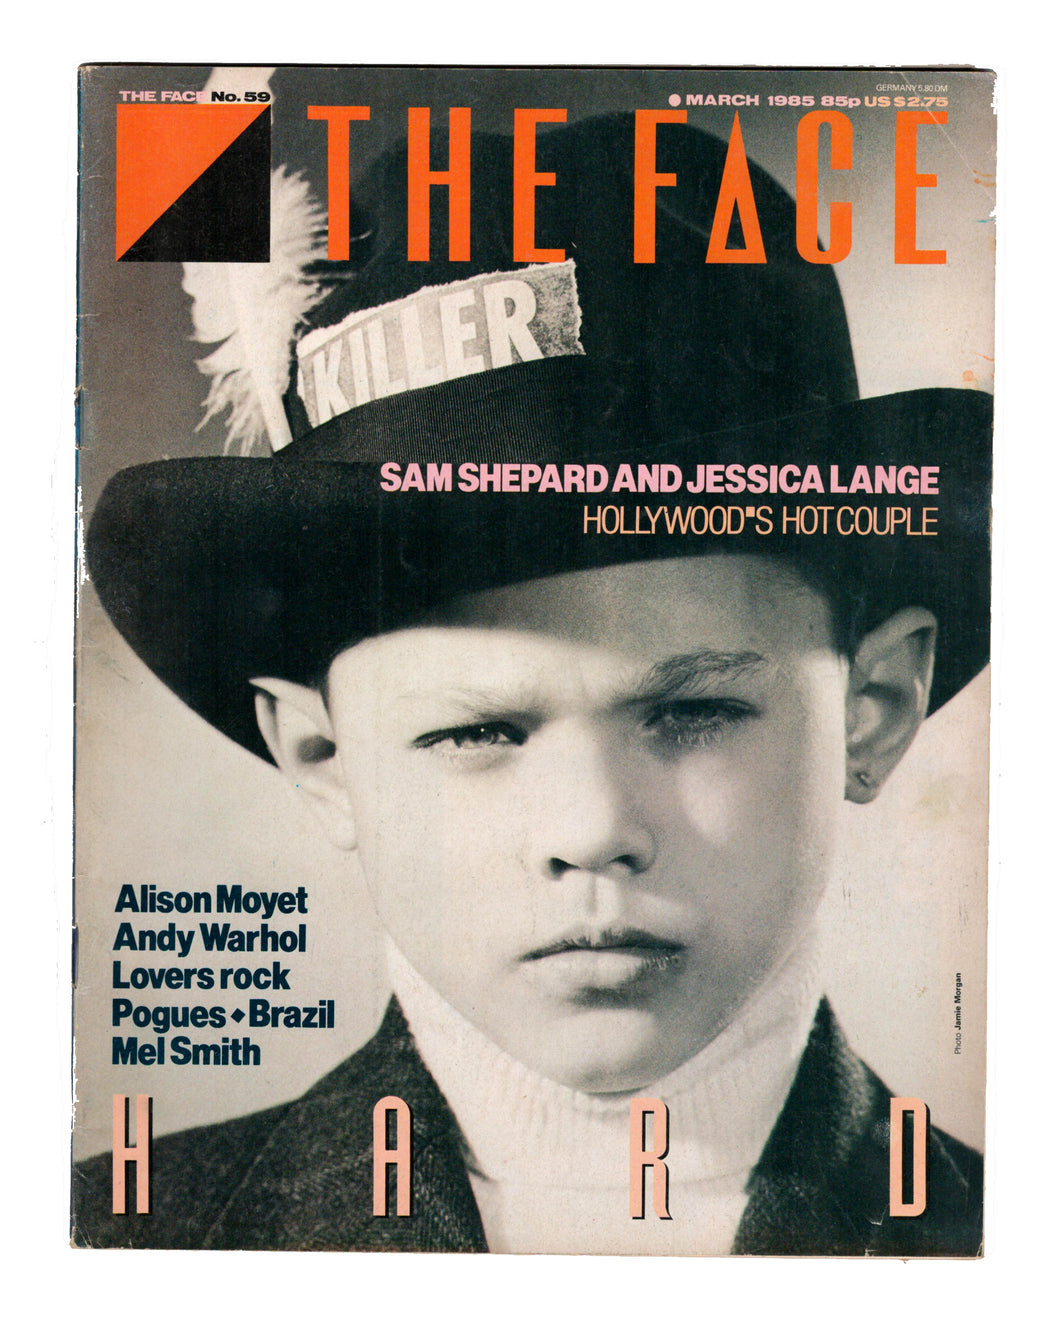 The Face No 59 March 1985